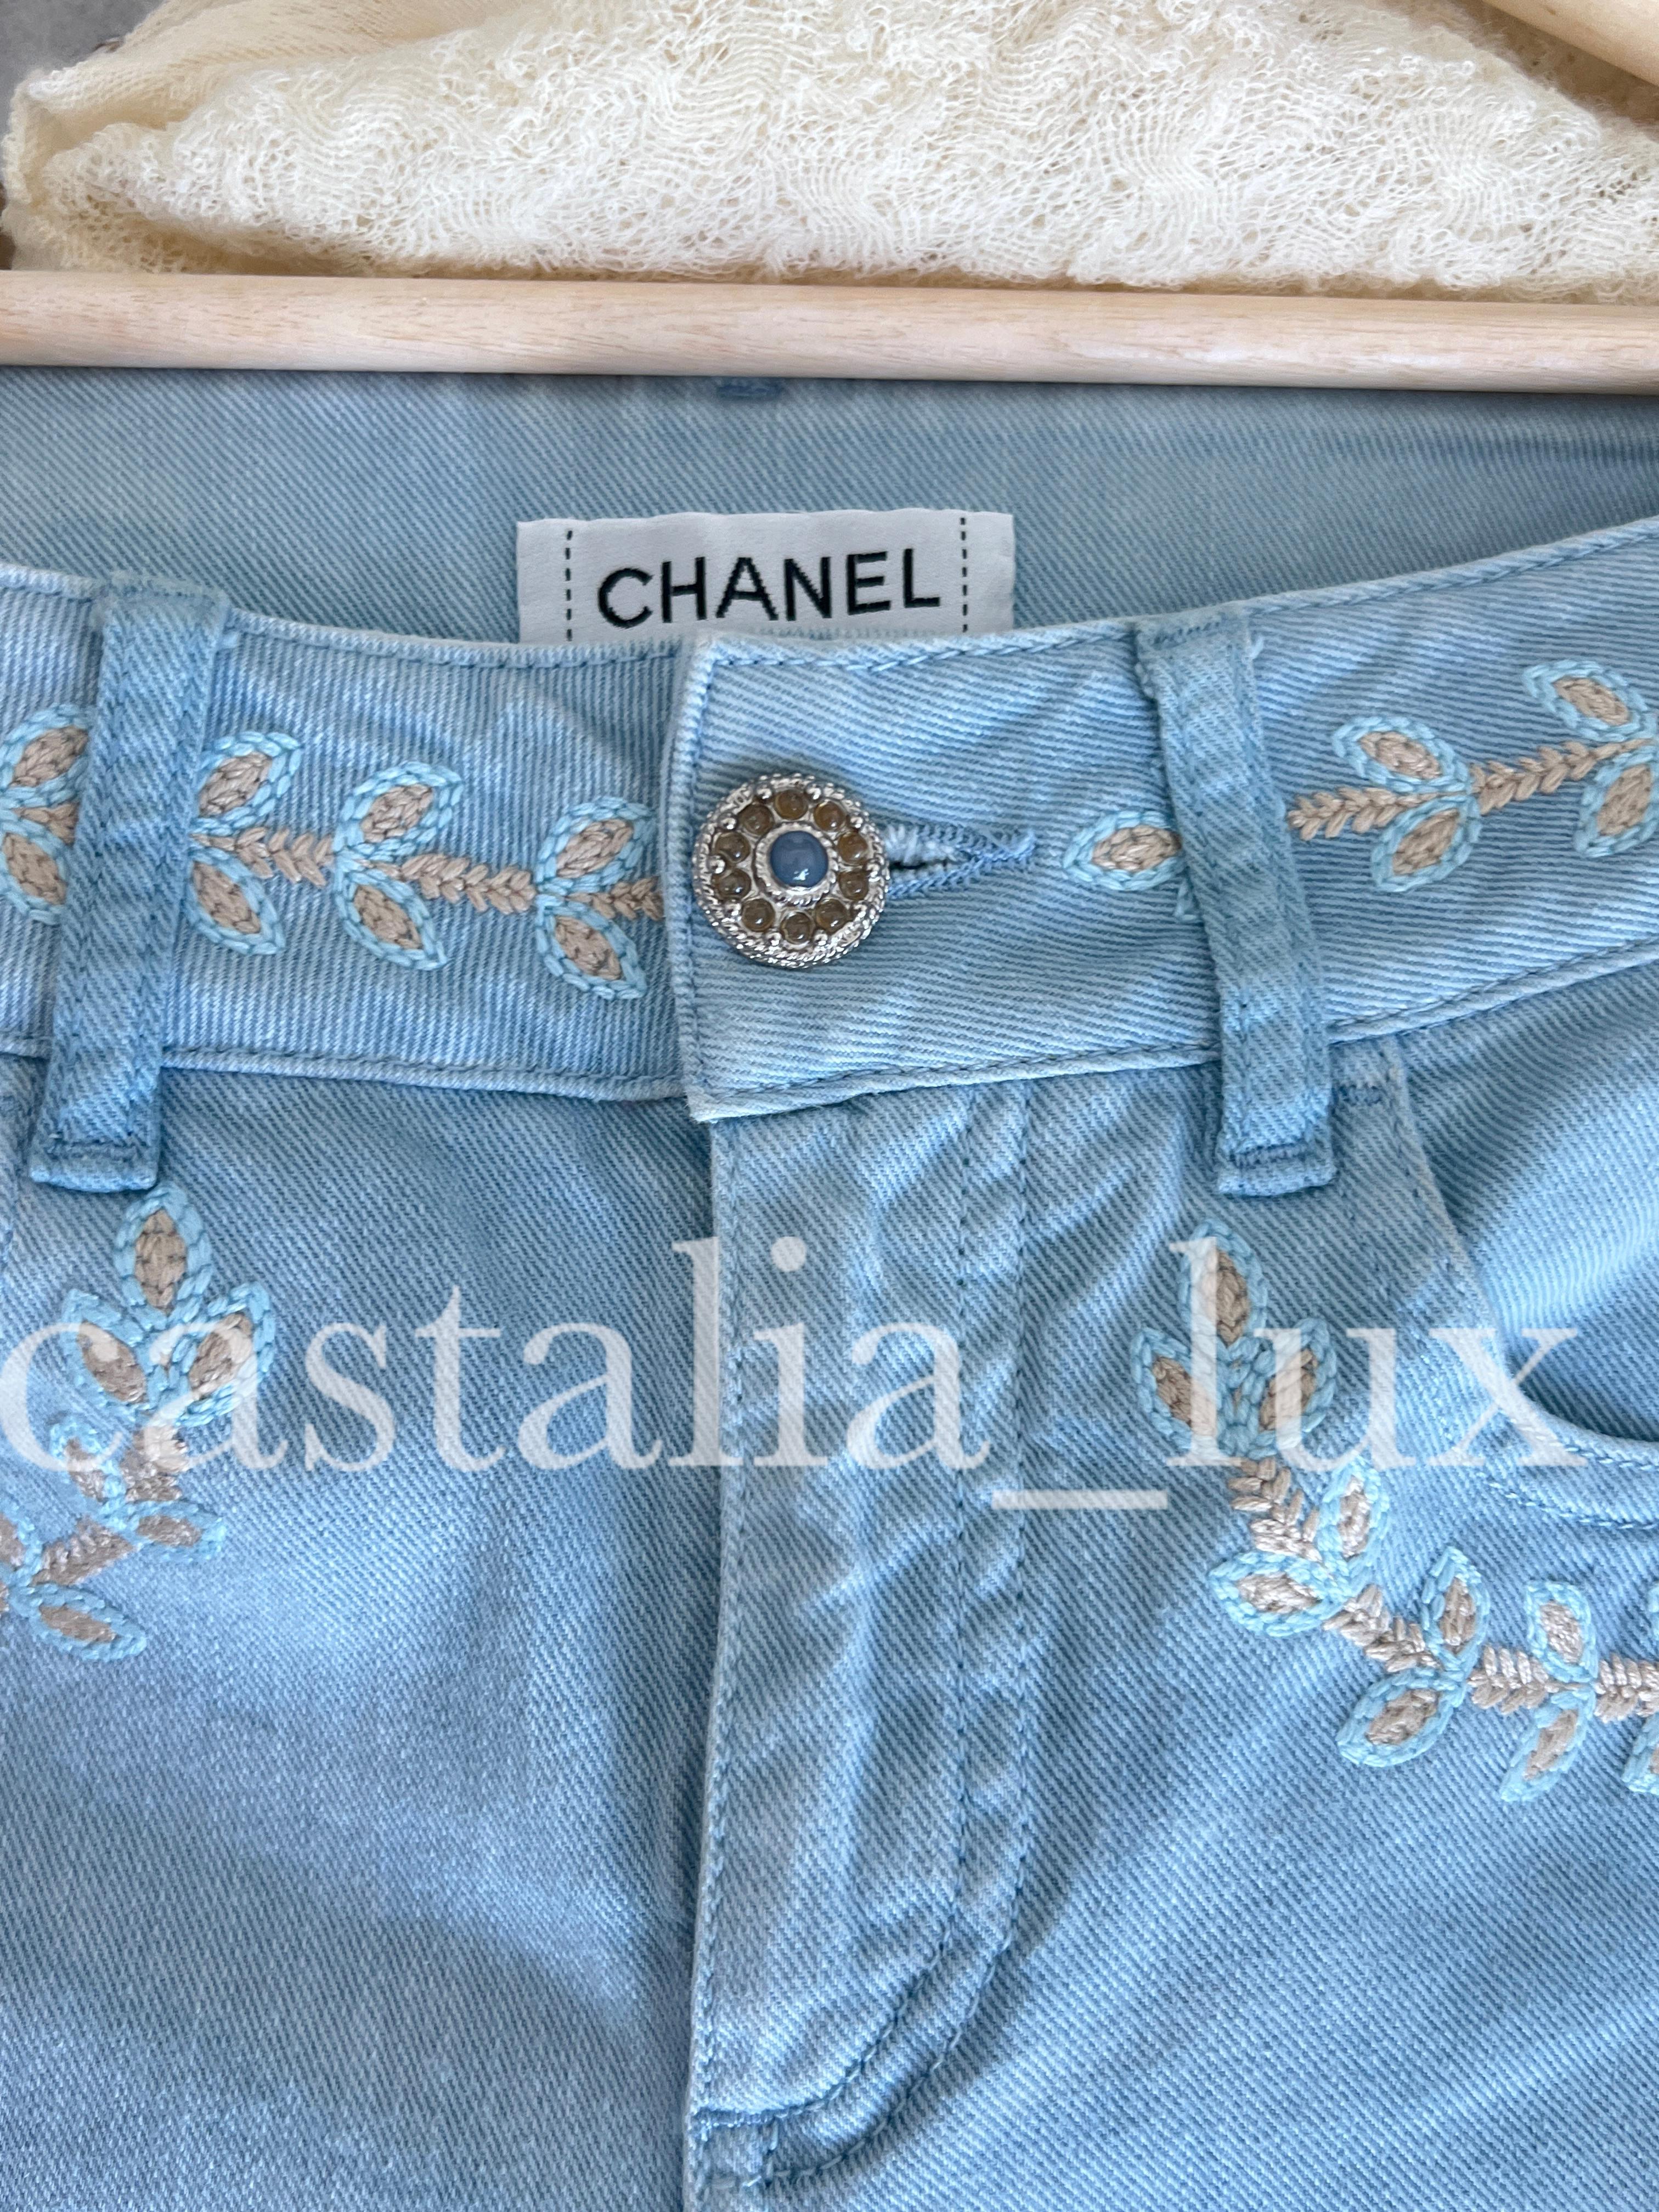 Chanel New CC Logo La Riviera Collection Runway Jeans For Sale 7